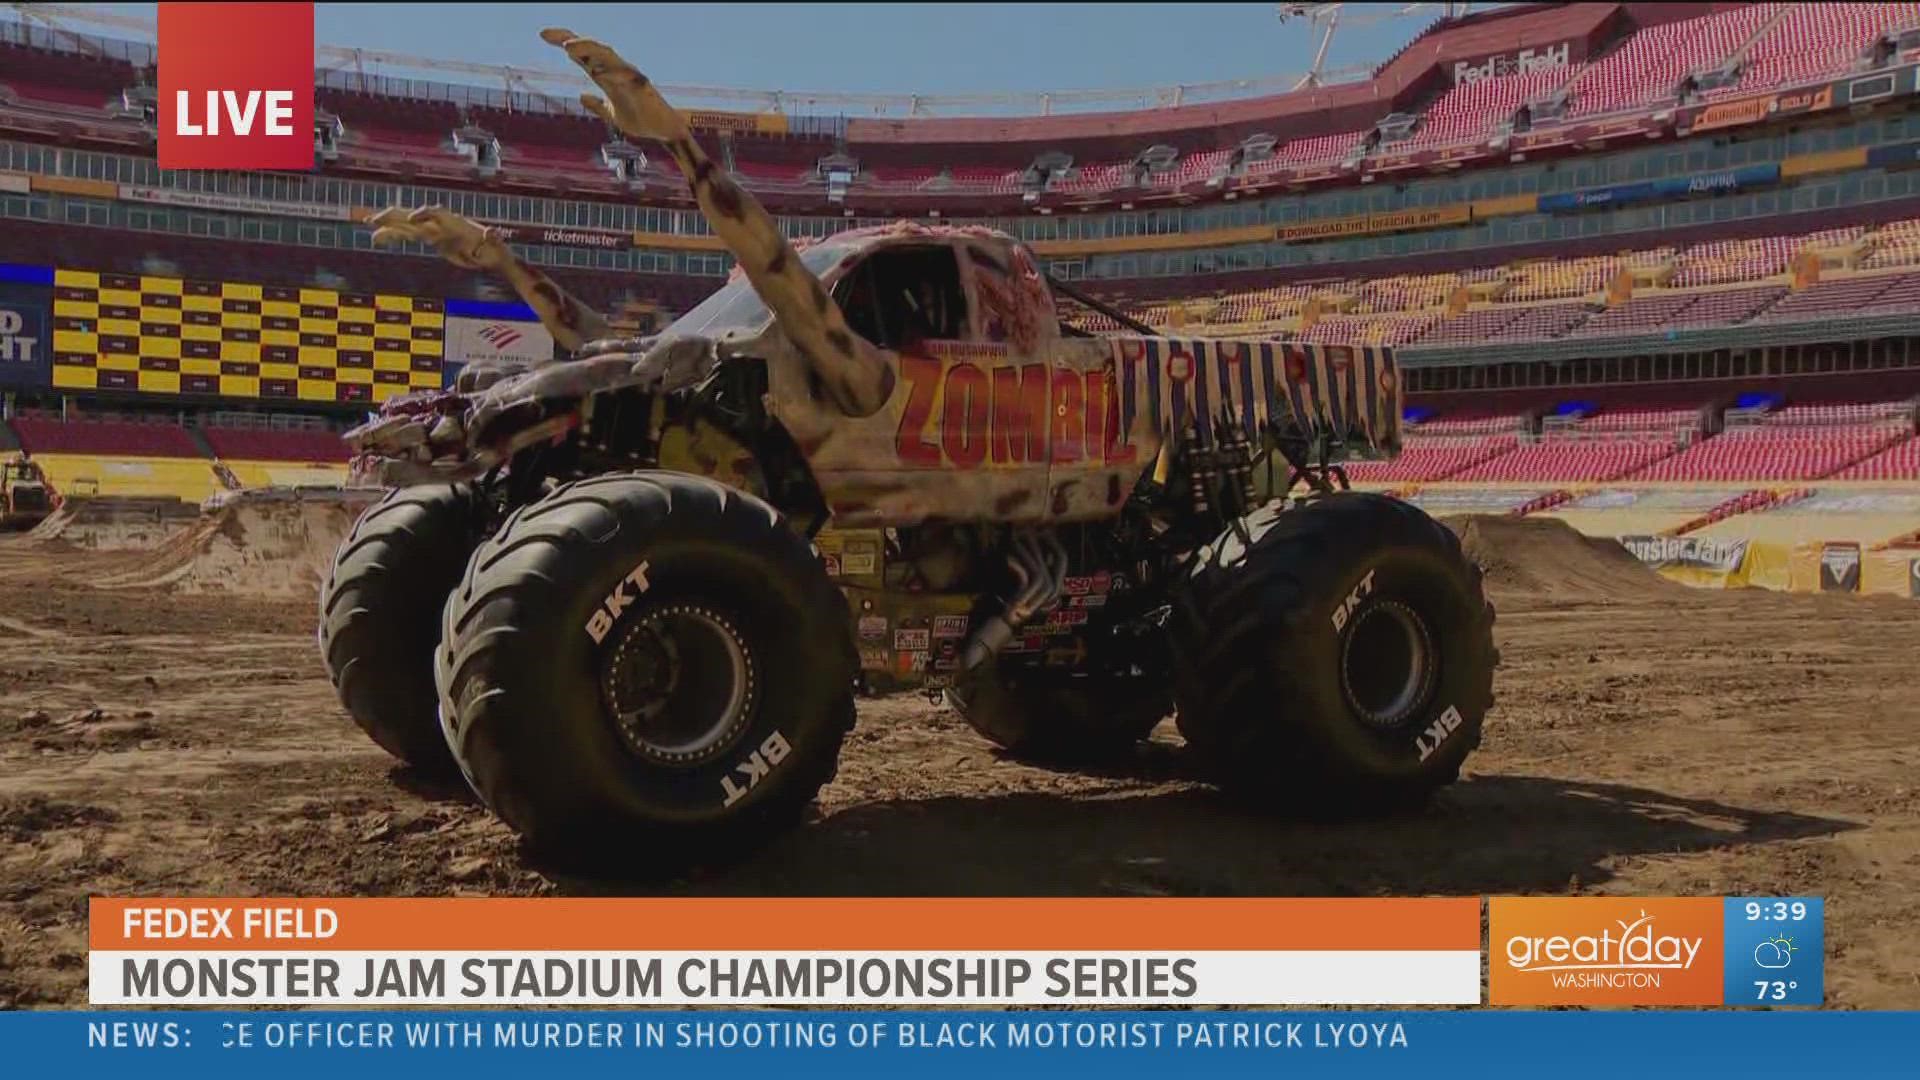 Monster Jam is here and we get a preview